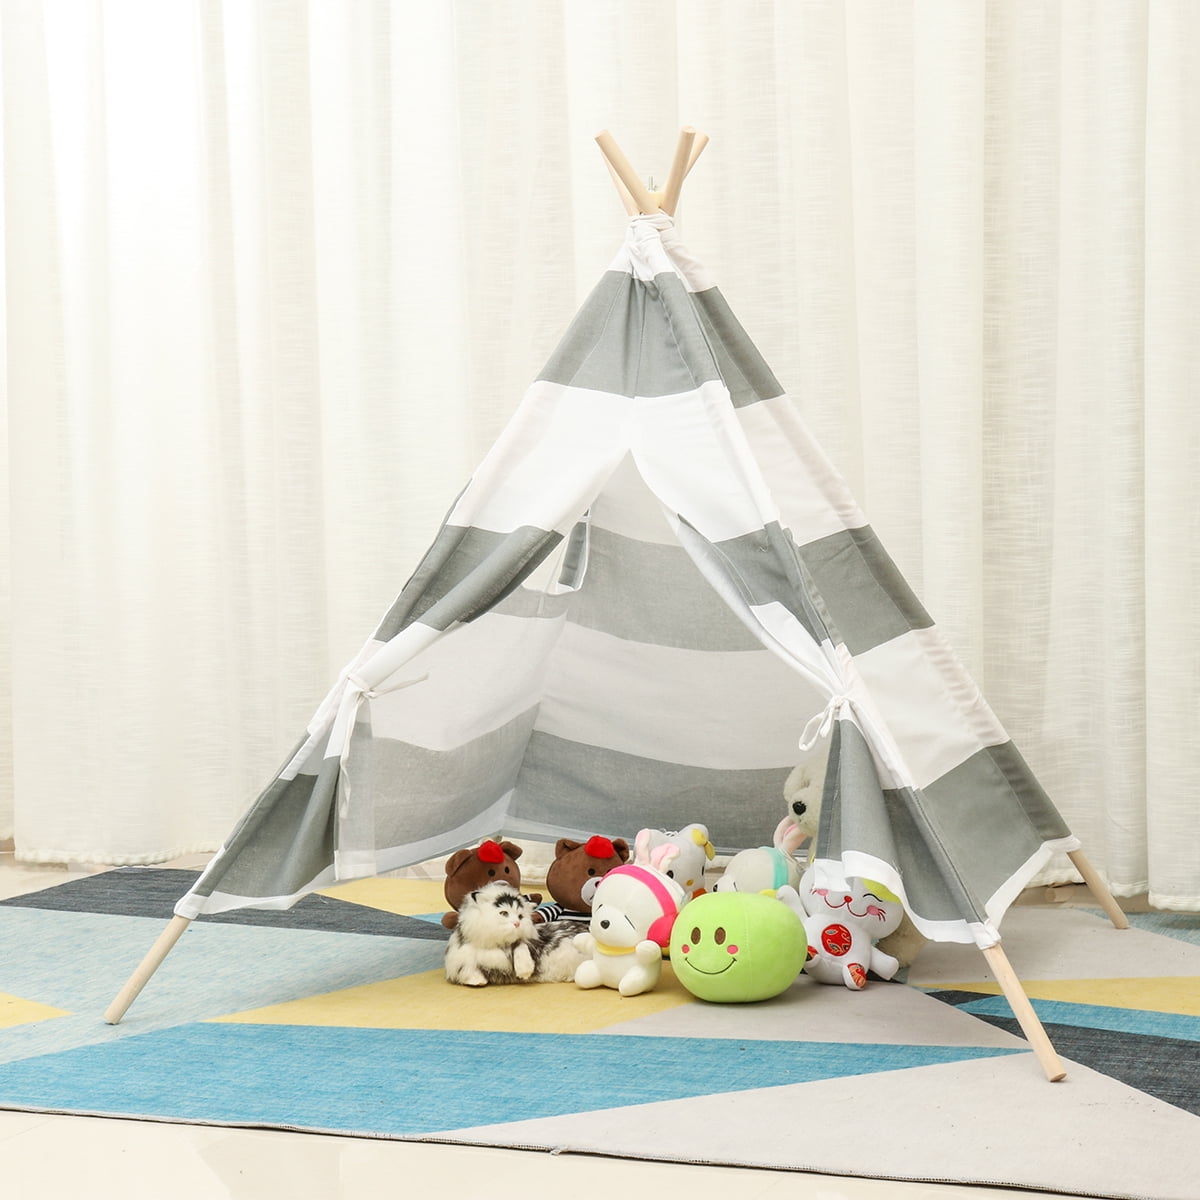 Girls Princess GIANT WIGWAM TEEPEE Canvas Children Play Tent Play House Indoor 